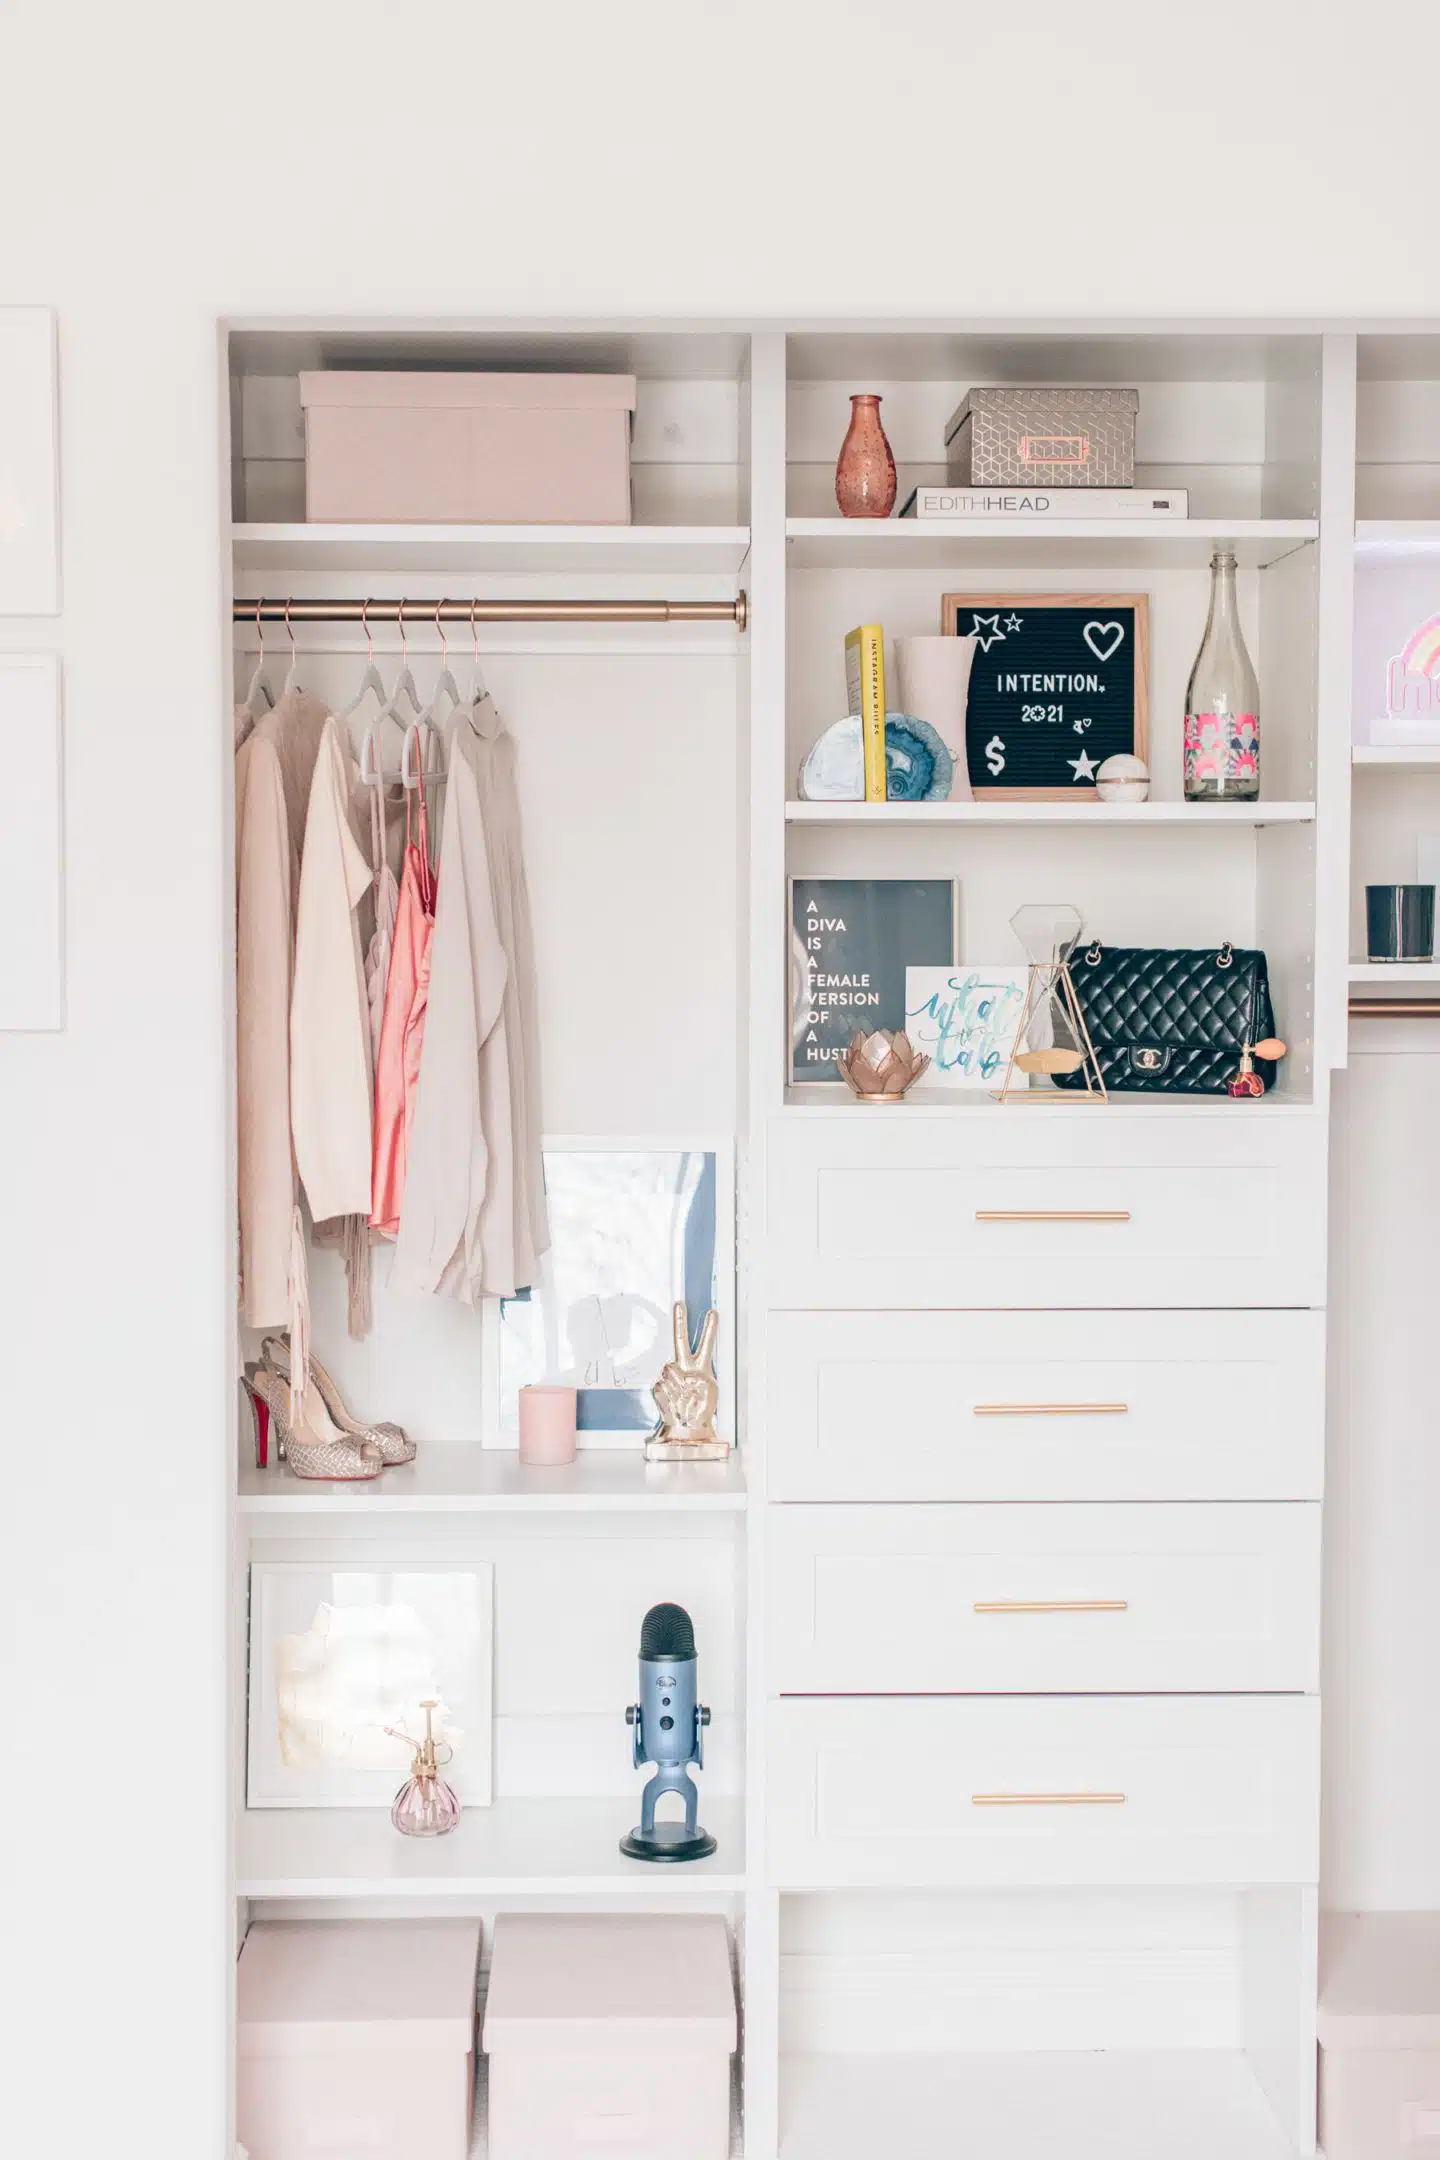 Modular closets cloffice design, by lifestyle blogger What The Fab